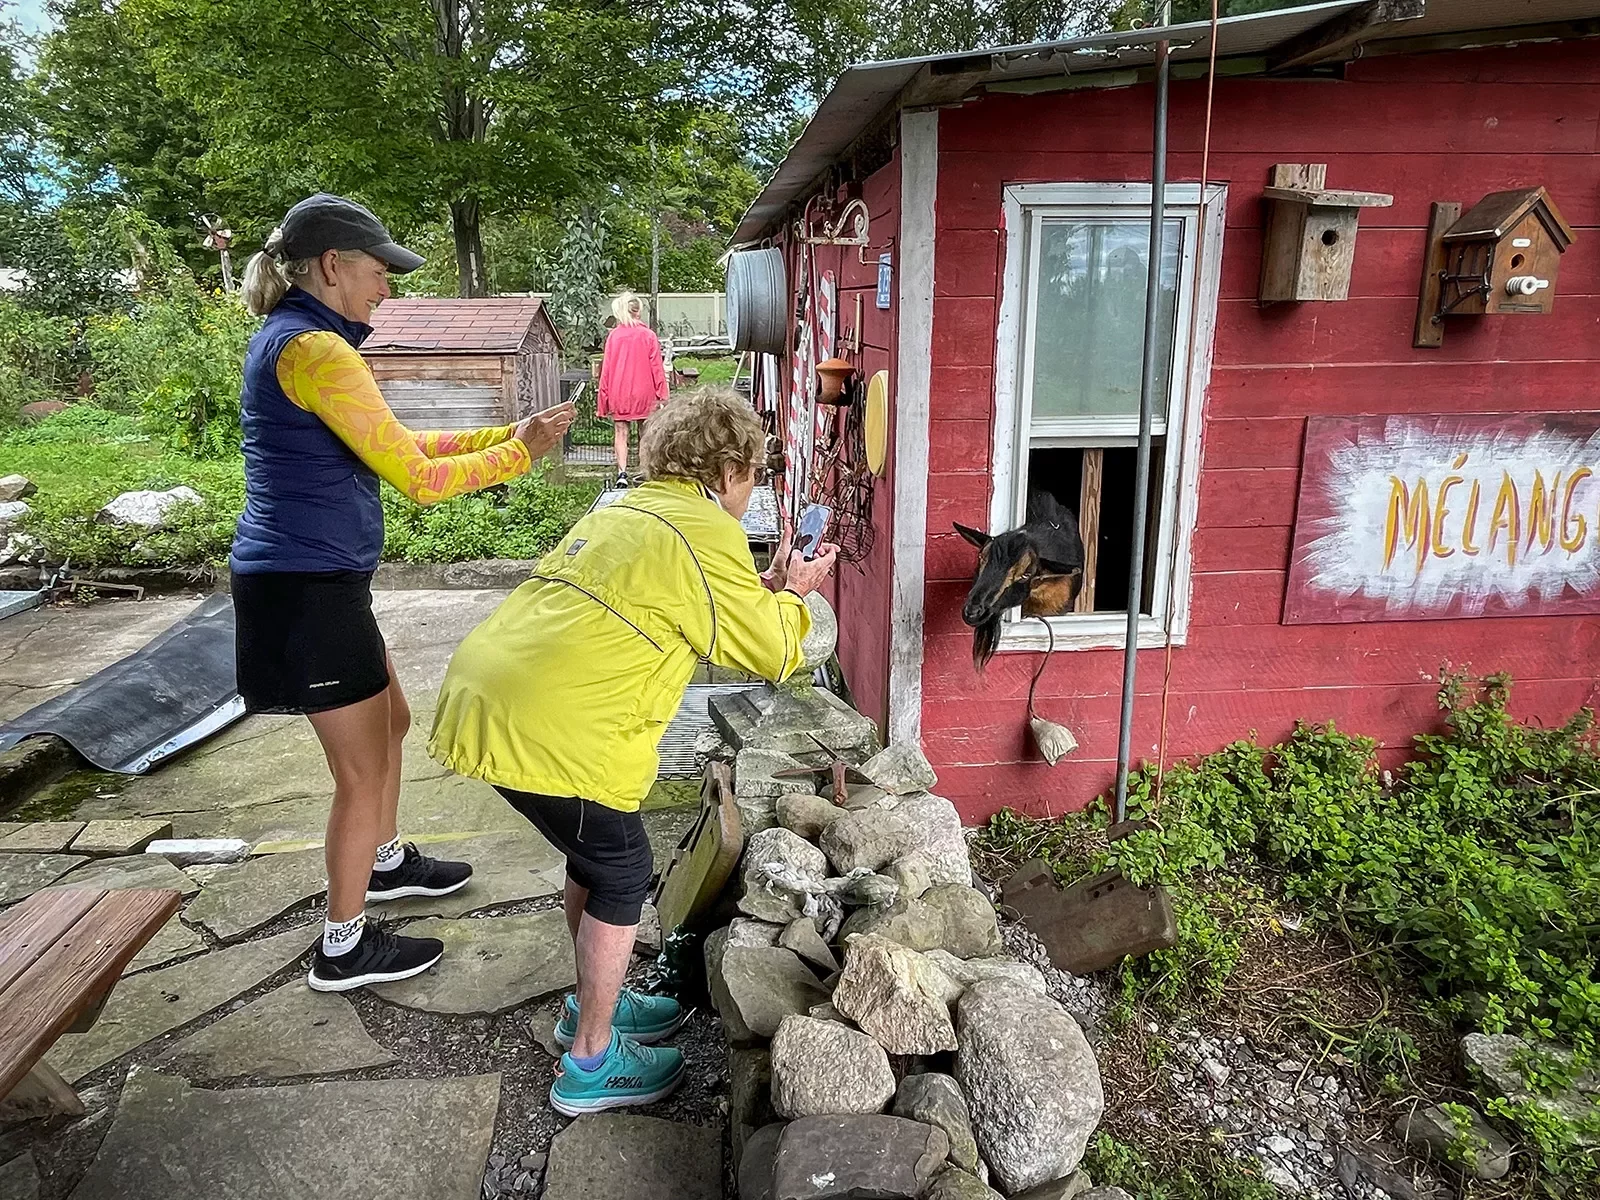 Two people pause to take a photo of a goat in a red house